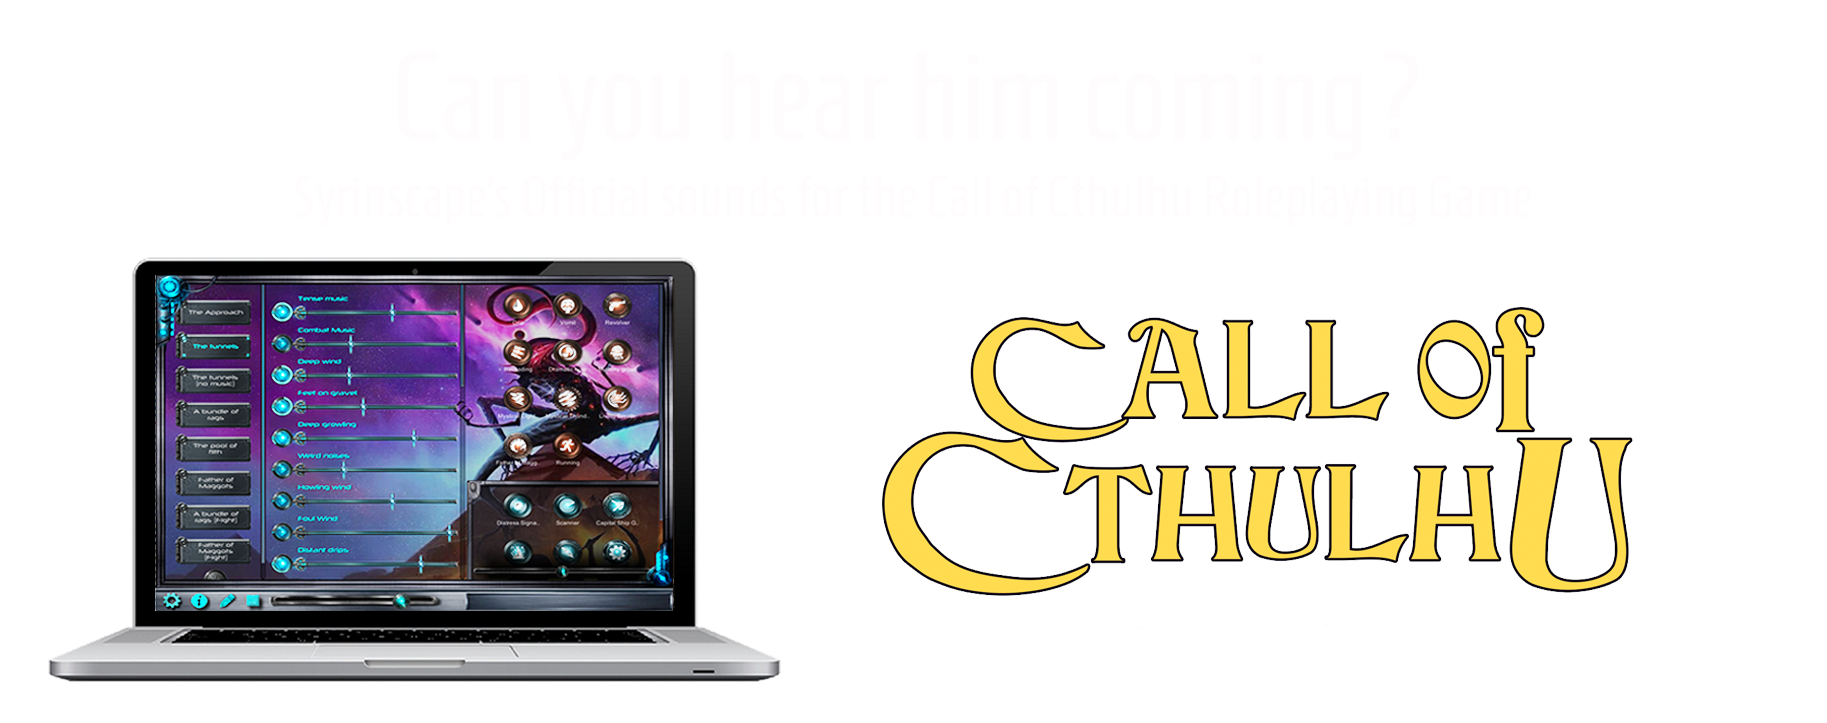 Syrinscapes Official sounds for the Call of Cthulhu RPG